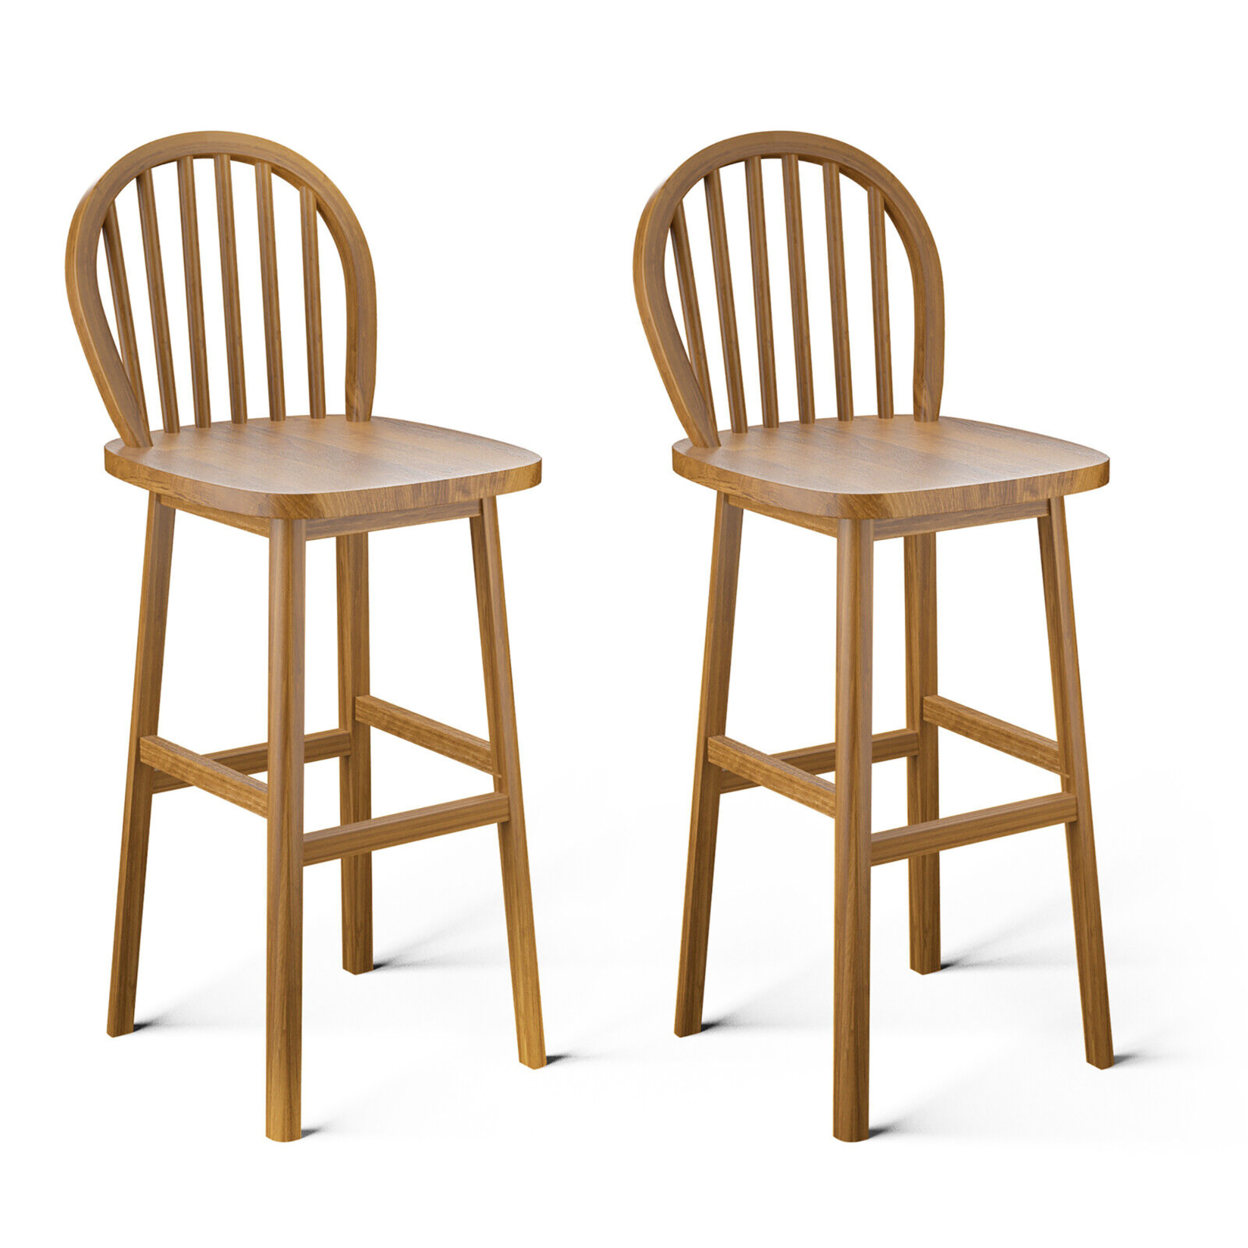 Set Of 2 Bar Stools Spindle-Back Bar Height Rubber Wood Kitchen Chairs Natural